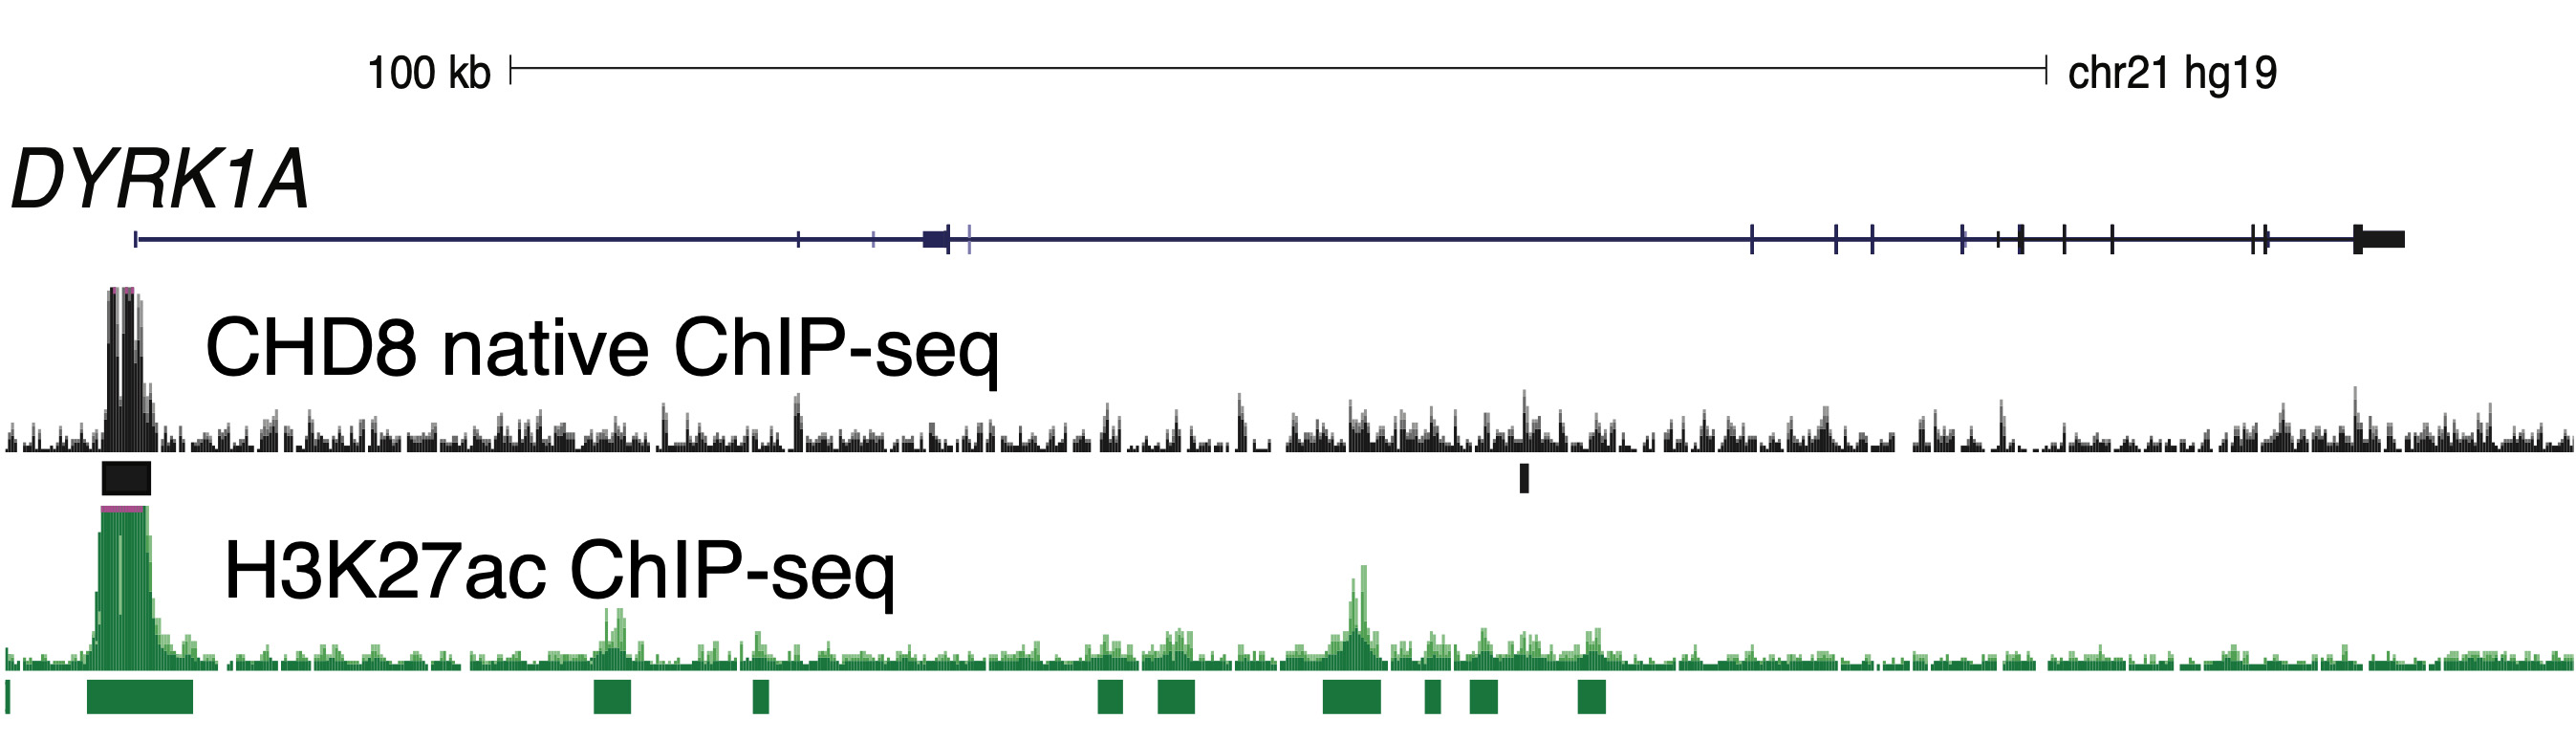 ChIP-seq diagram
                        of human neural stem cells (hNSCs) showing the
                        overlap of CHD8 binding at the DYRK1A promoter (a known
                        CHD8 target and ASD risk gene) with the active chromatin
                        mark H3K27ac.